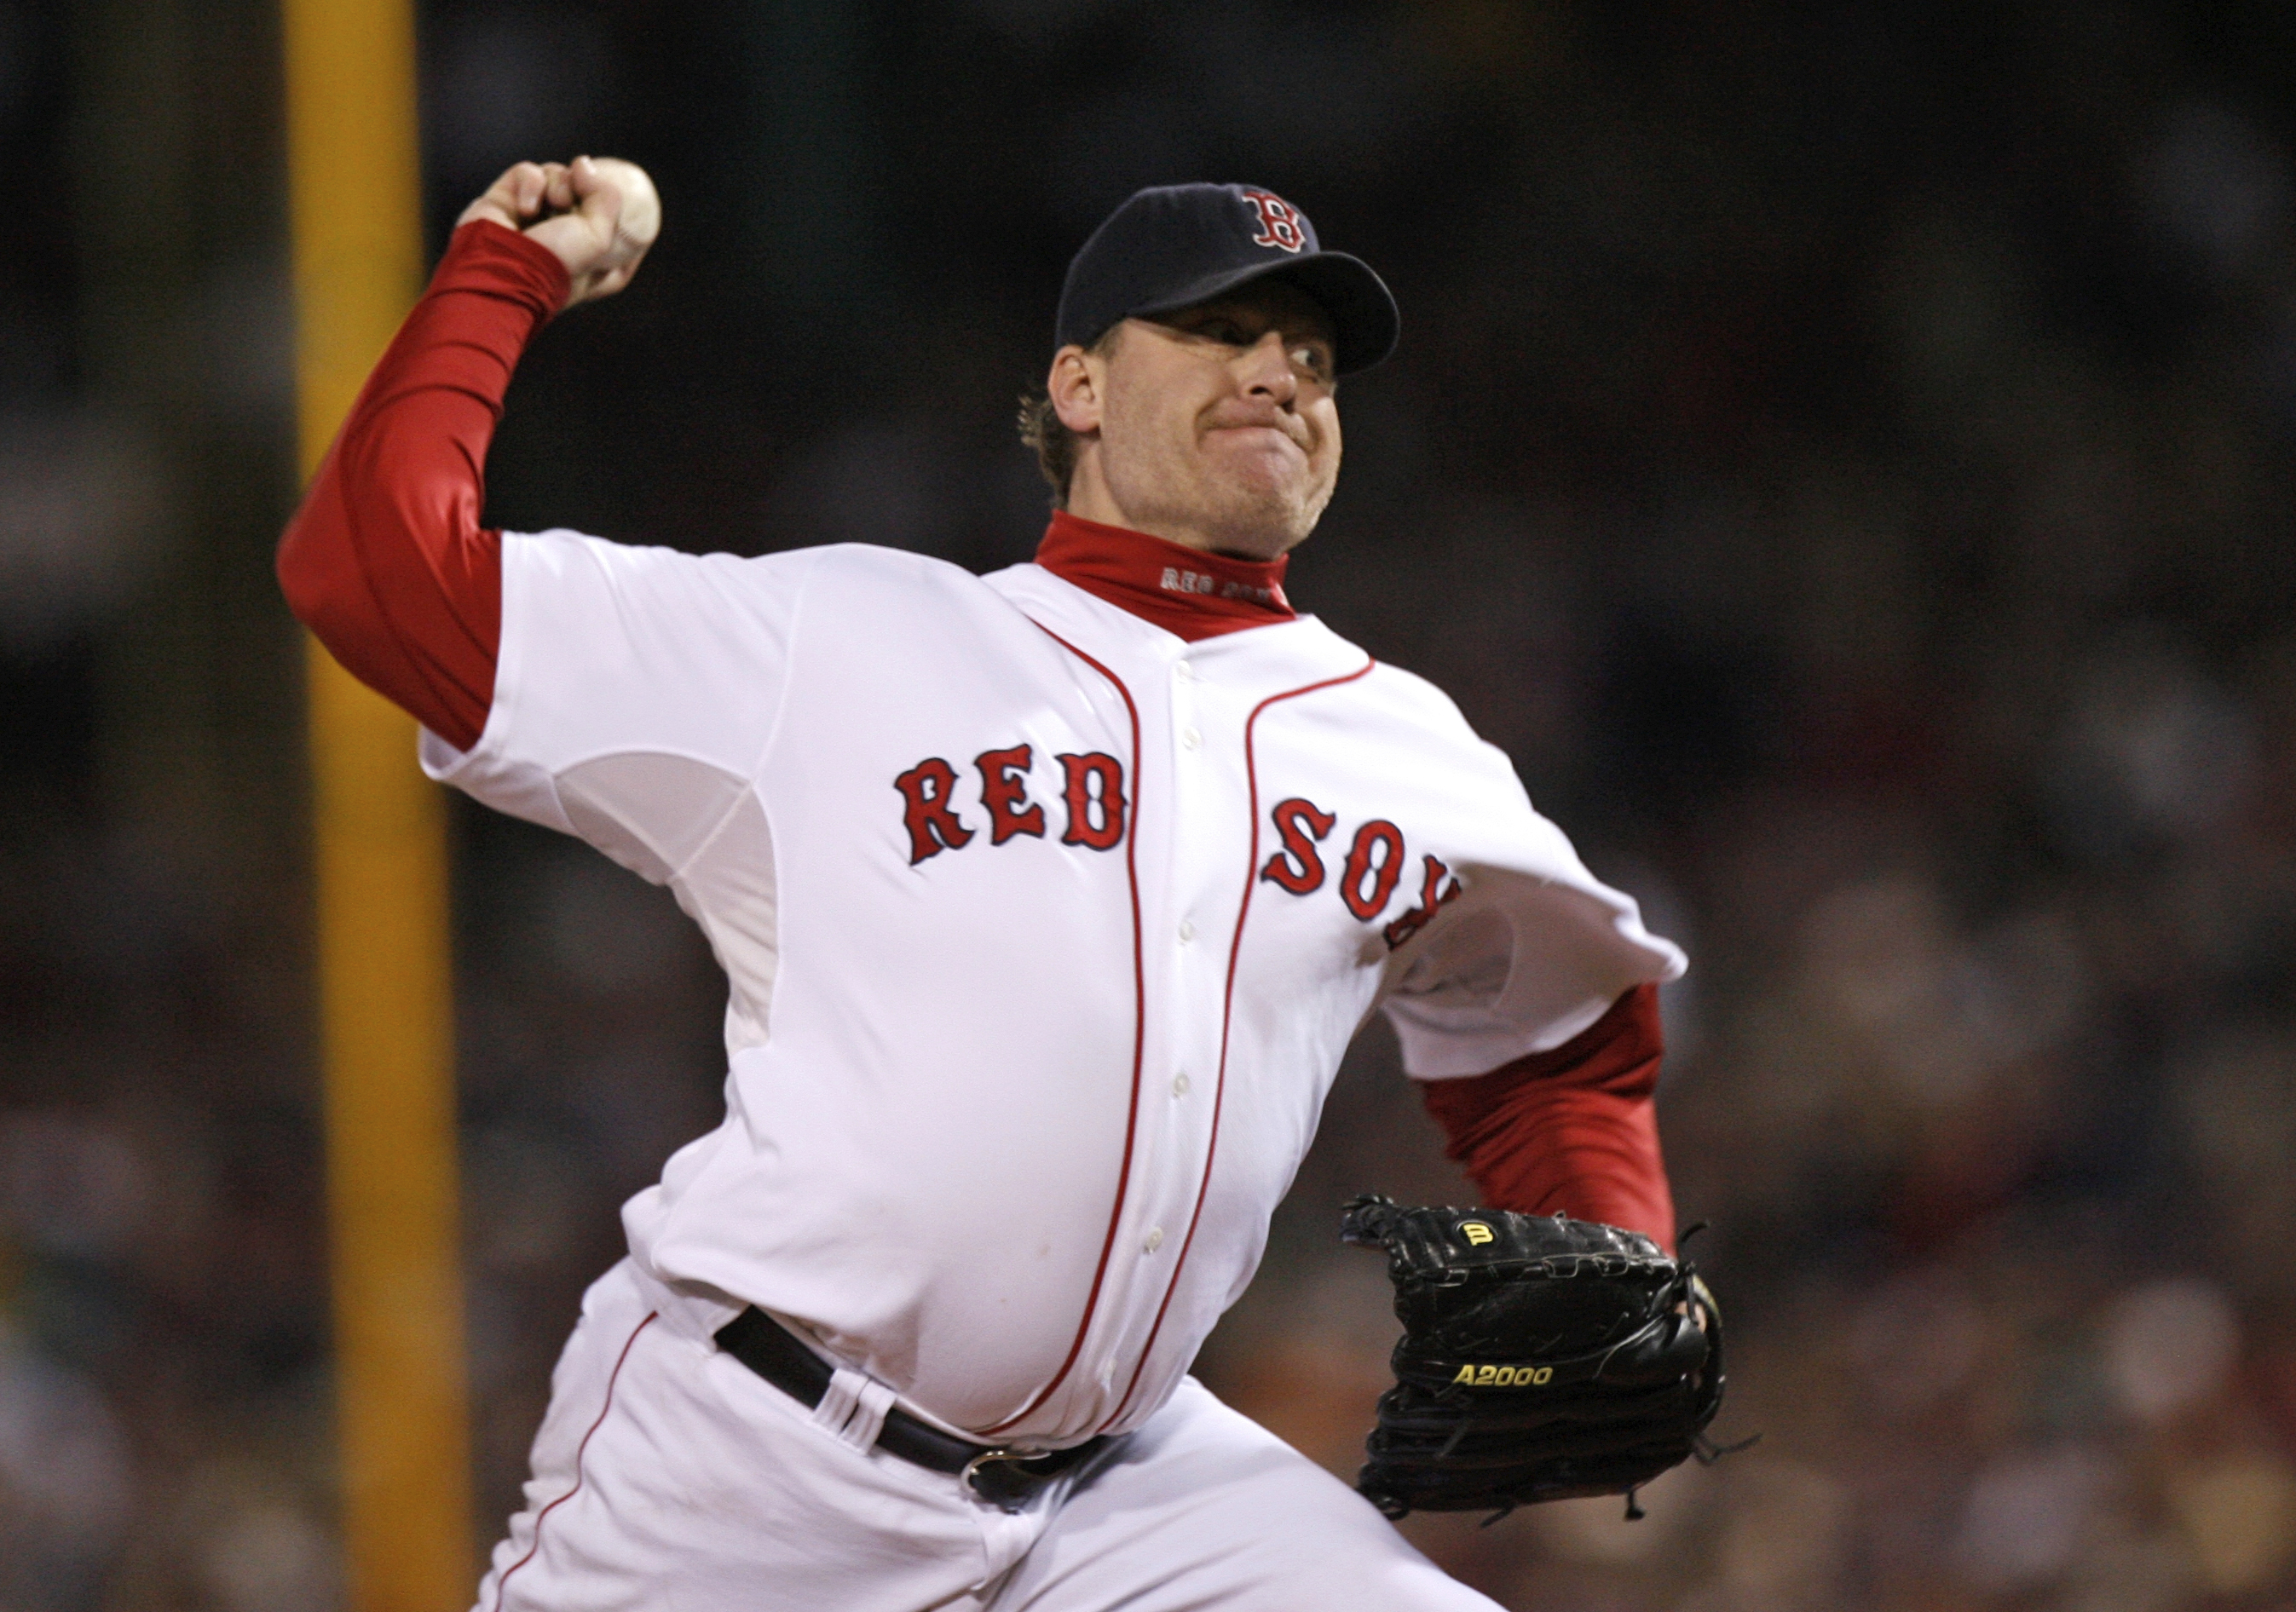 ESPN's Stark will have Curt Schilling on his 2018 Hall of Fame Ballot